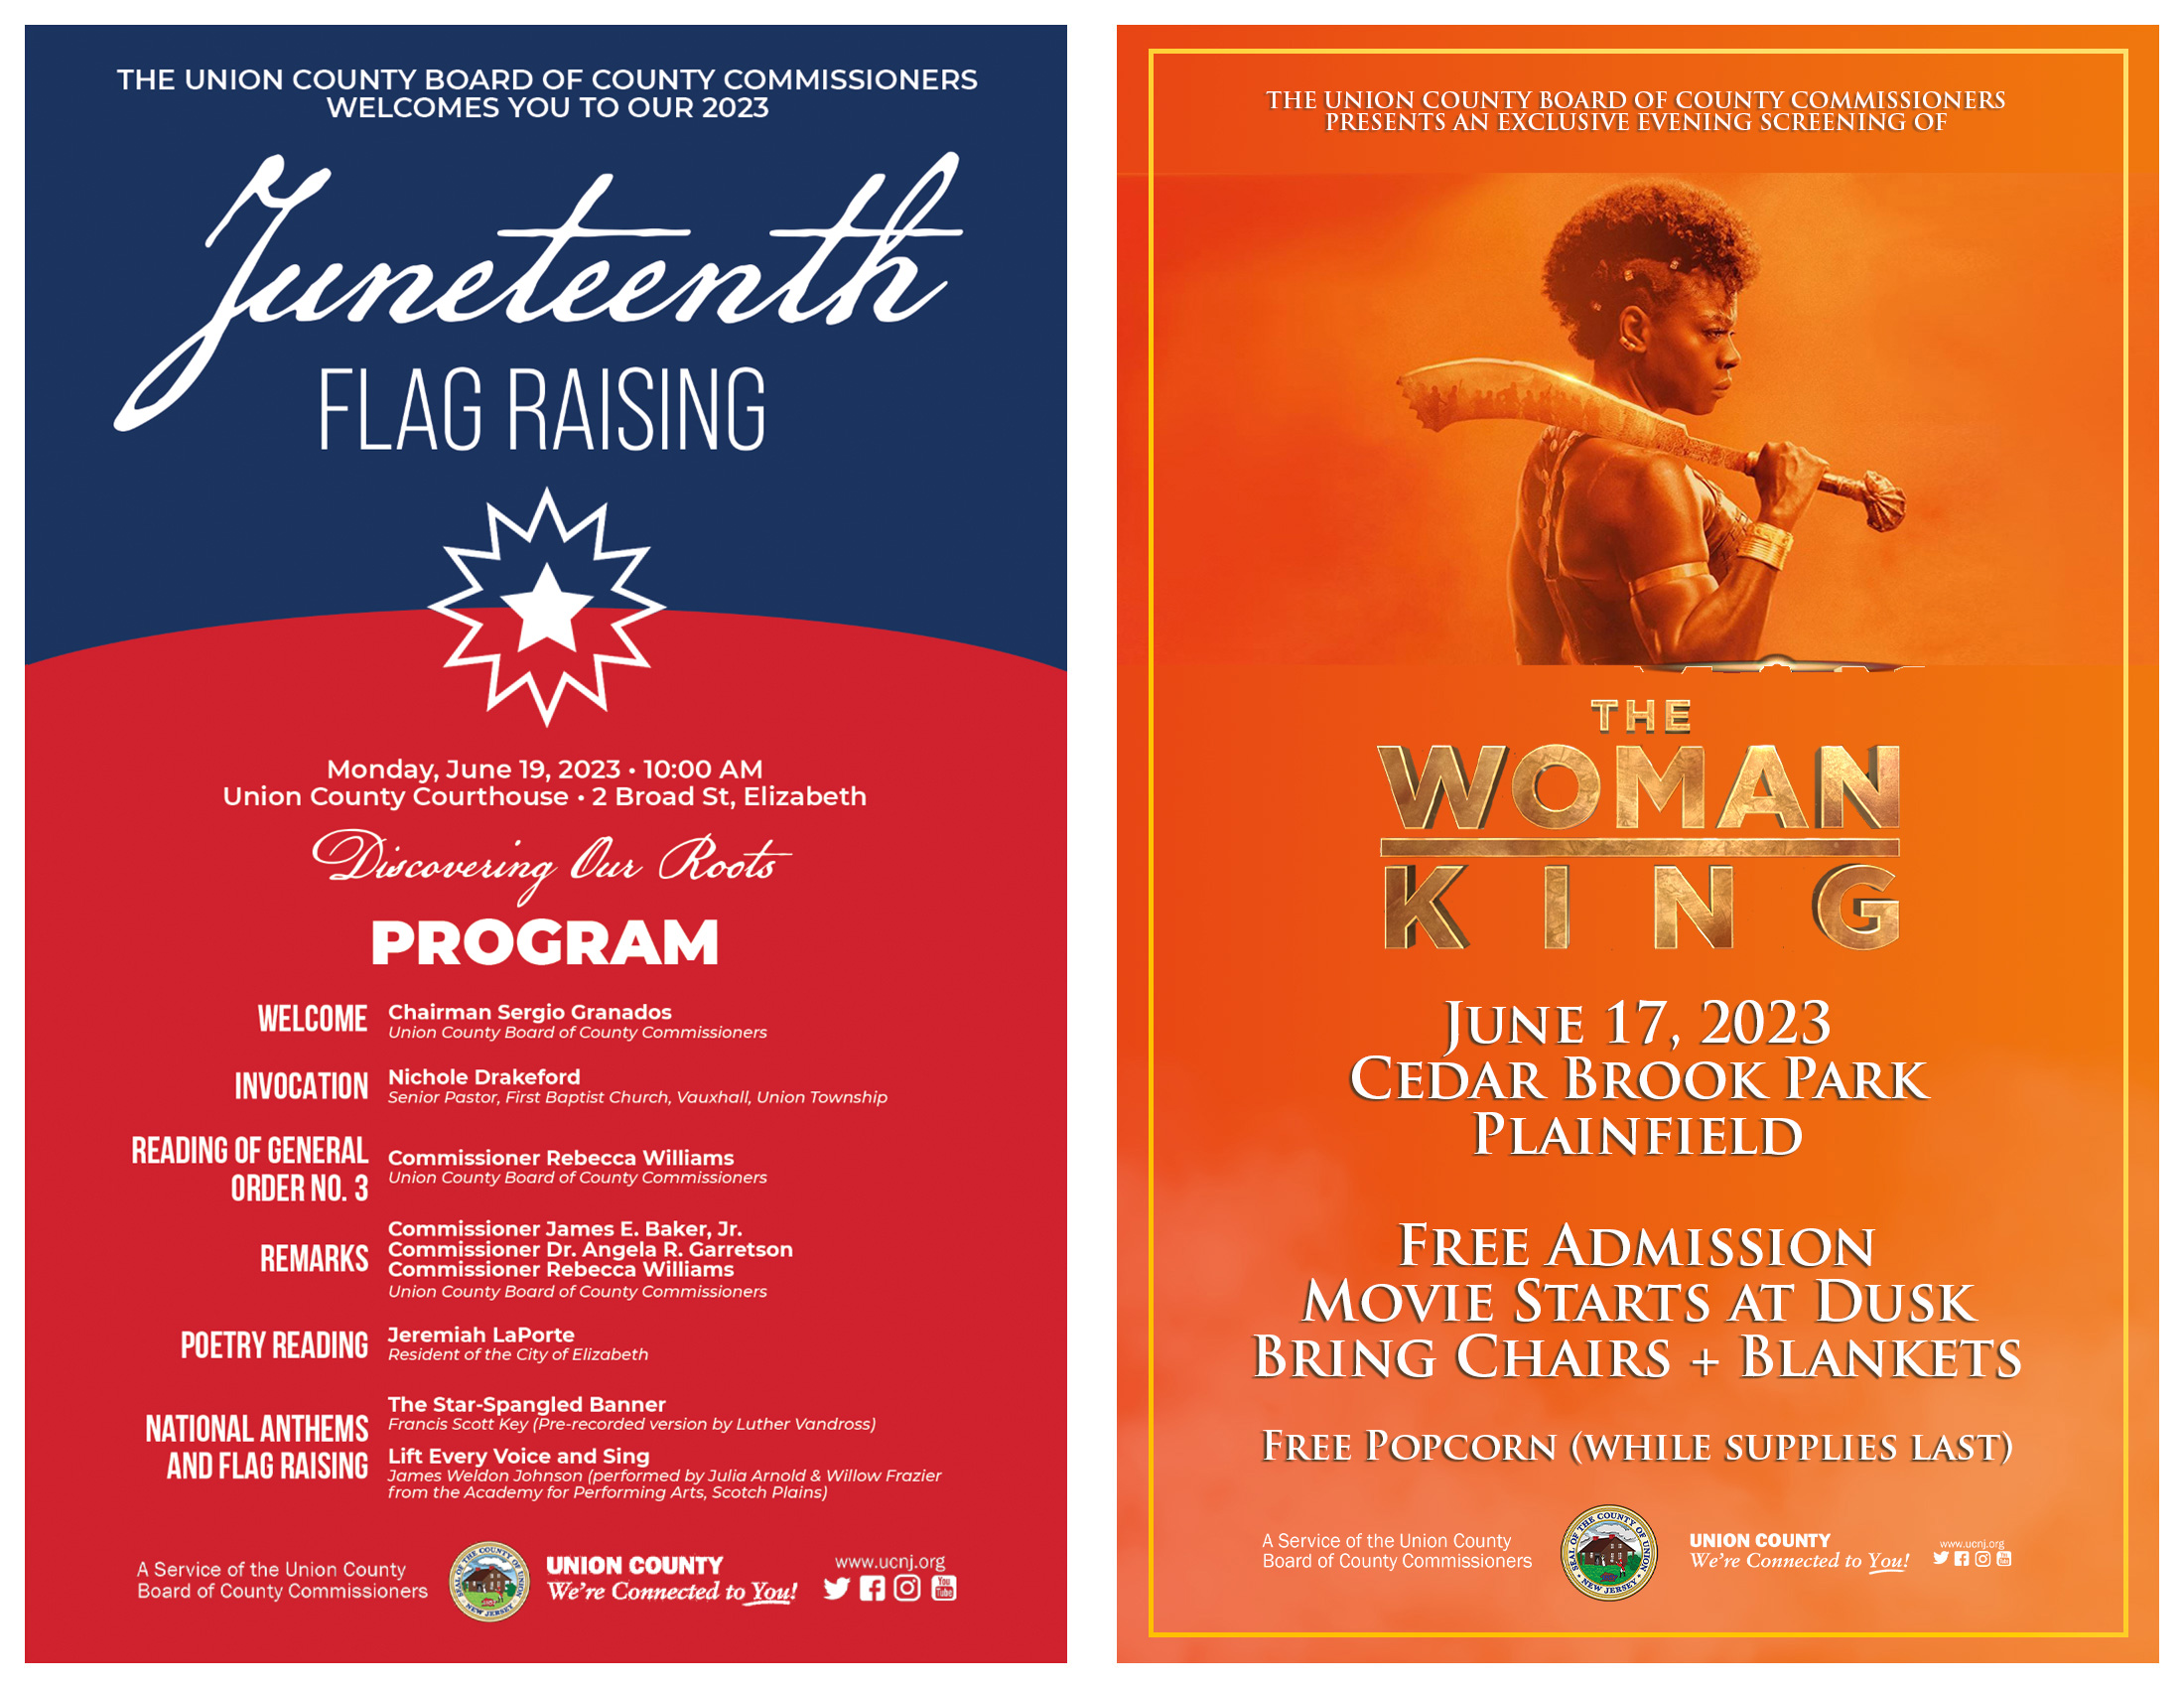 Juneteenth and the woman king screening flyer